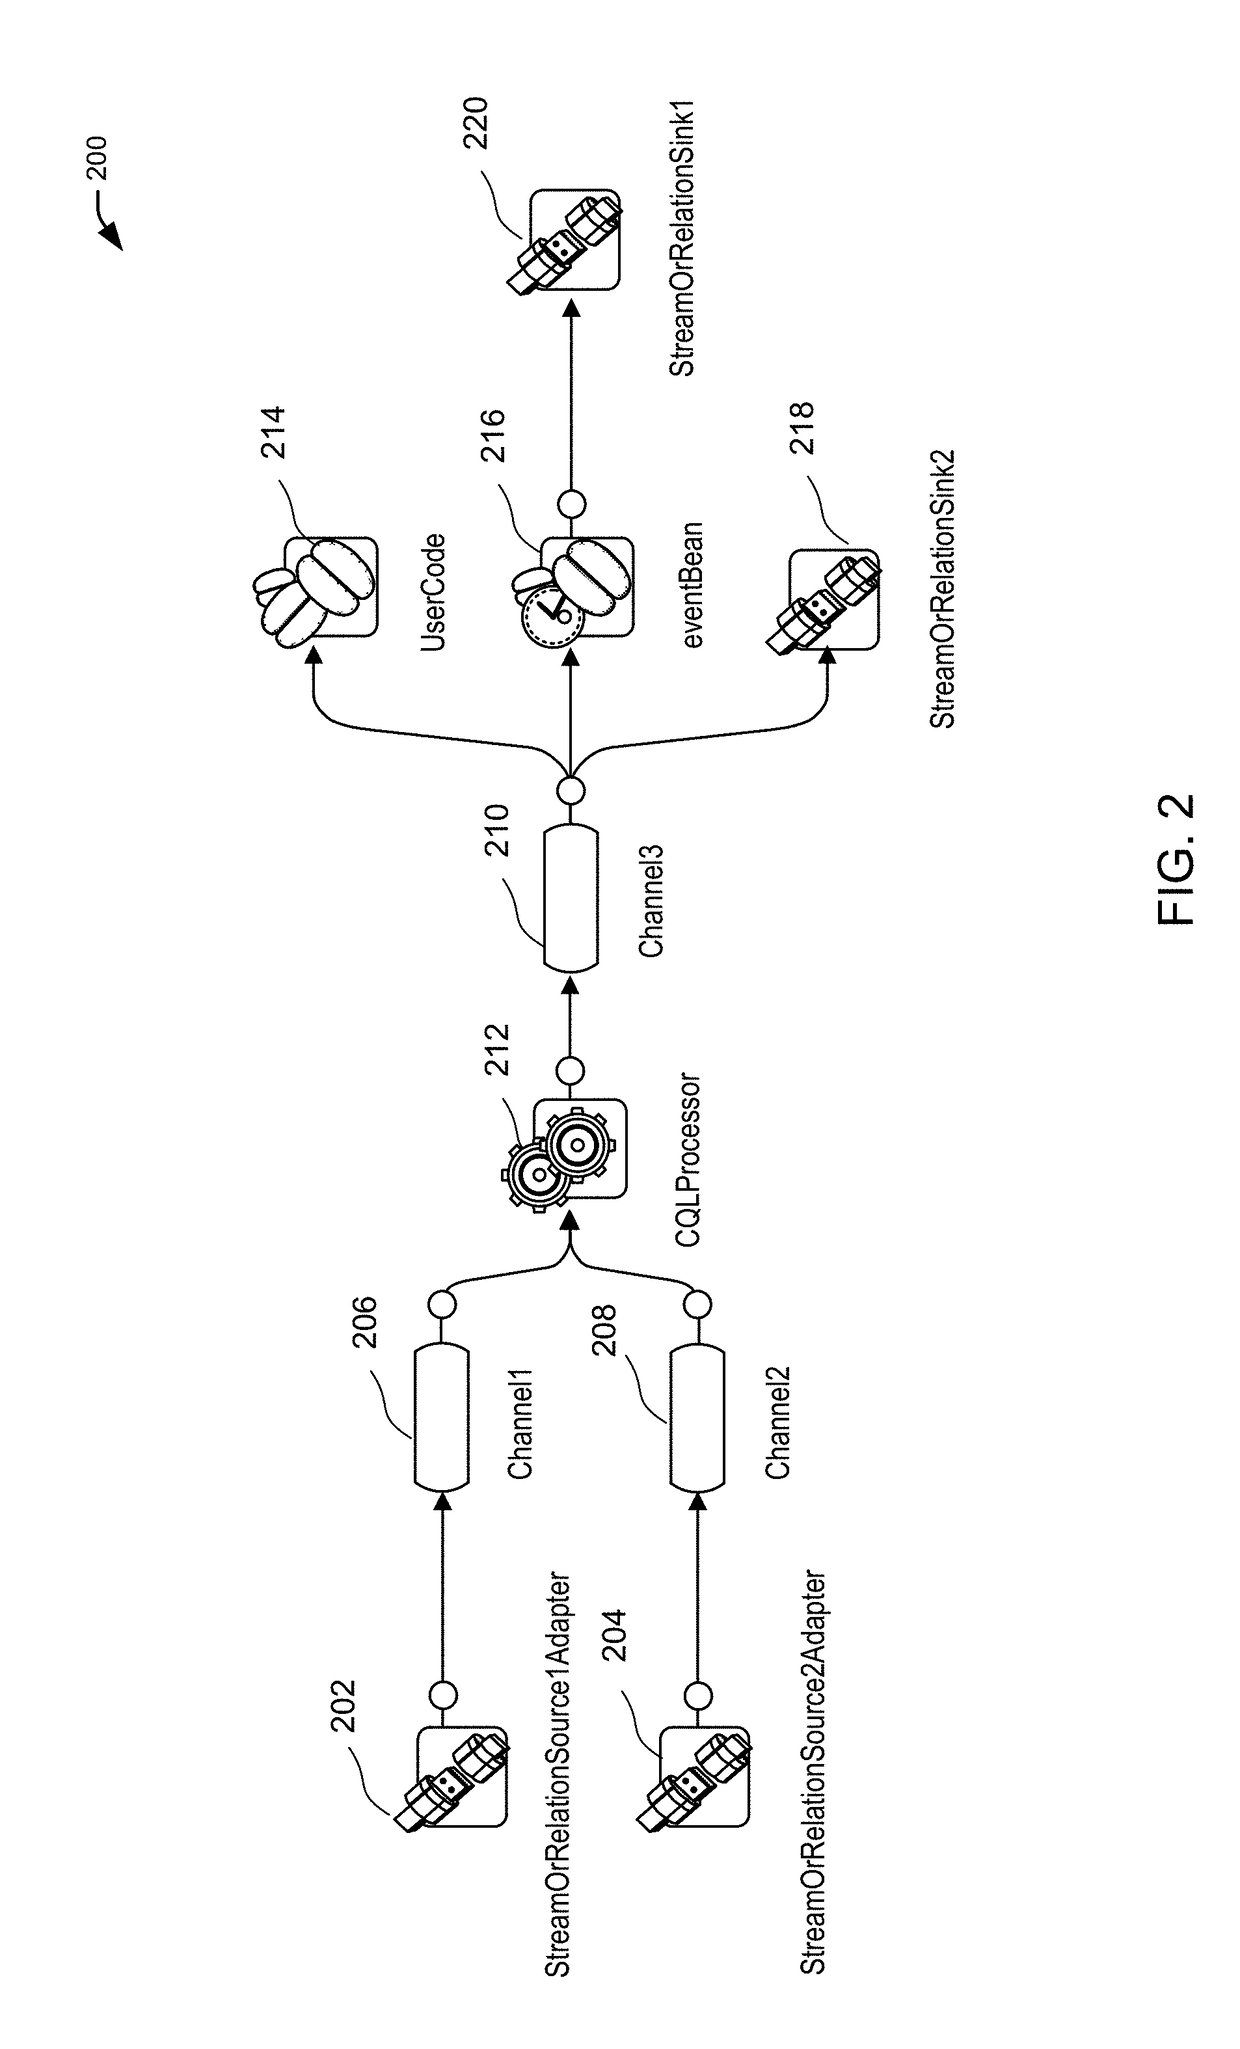 Graph generation for a distributed event processing system